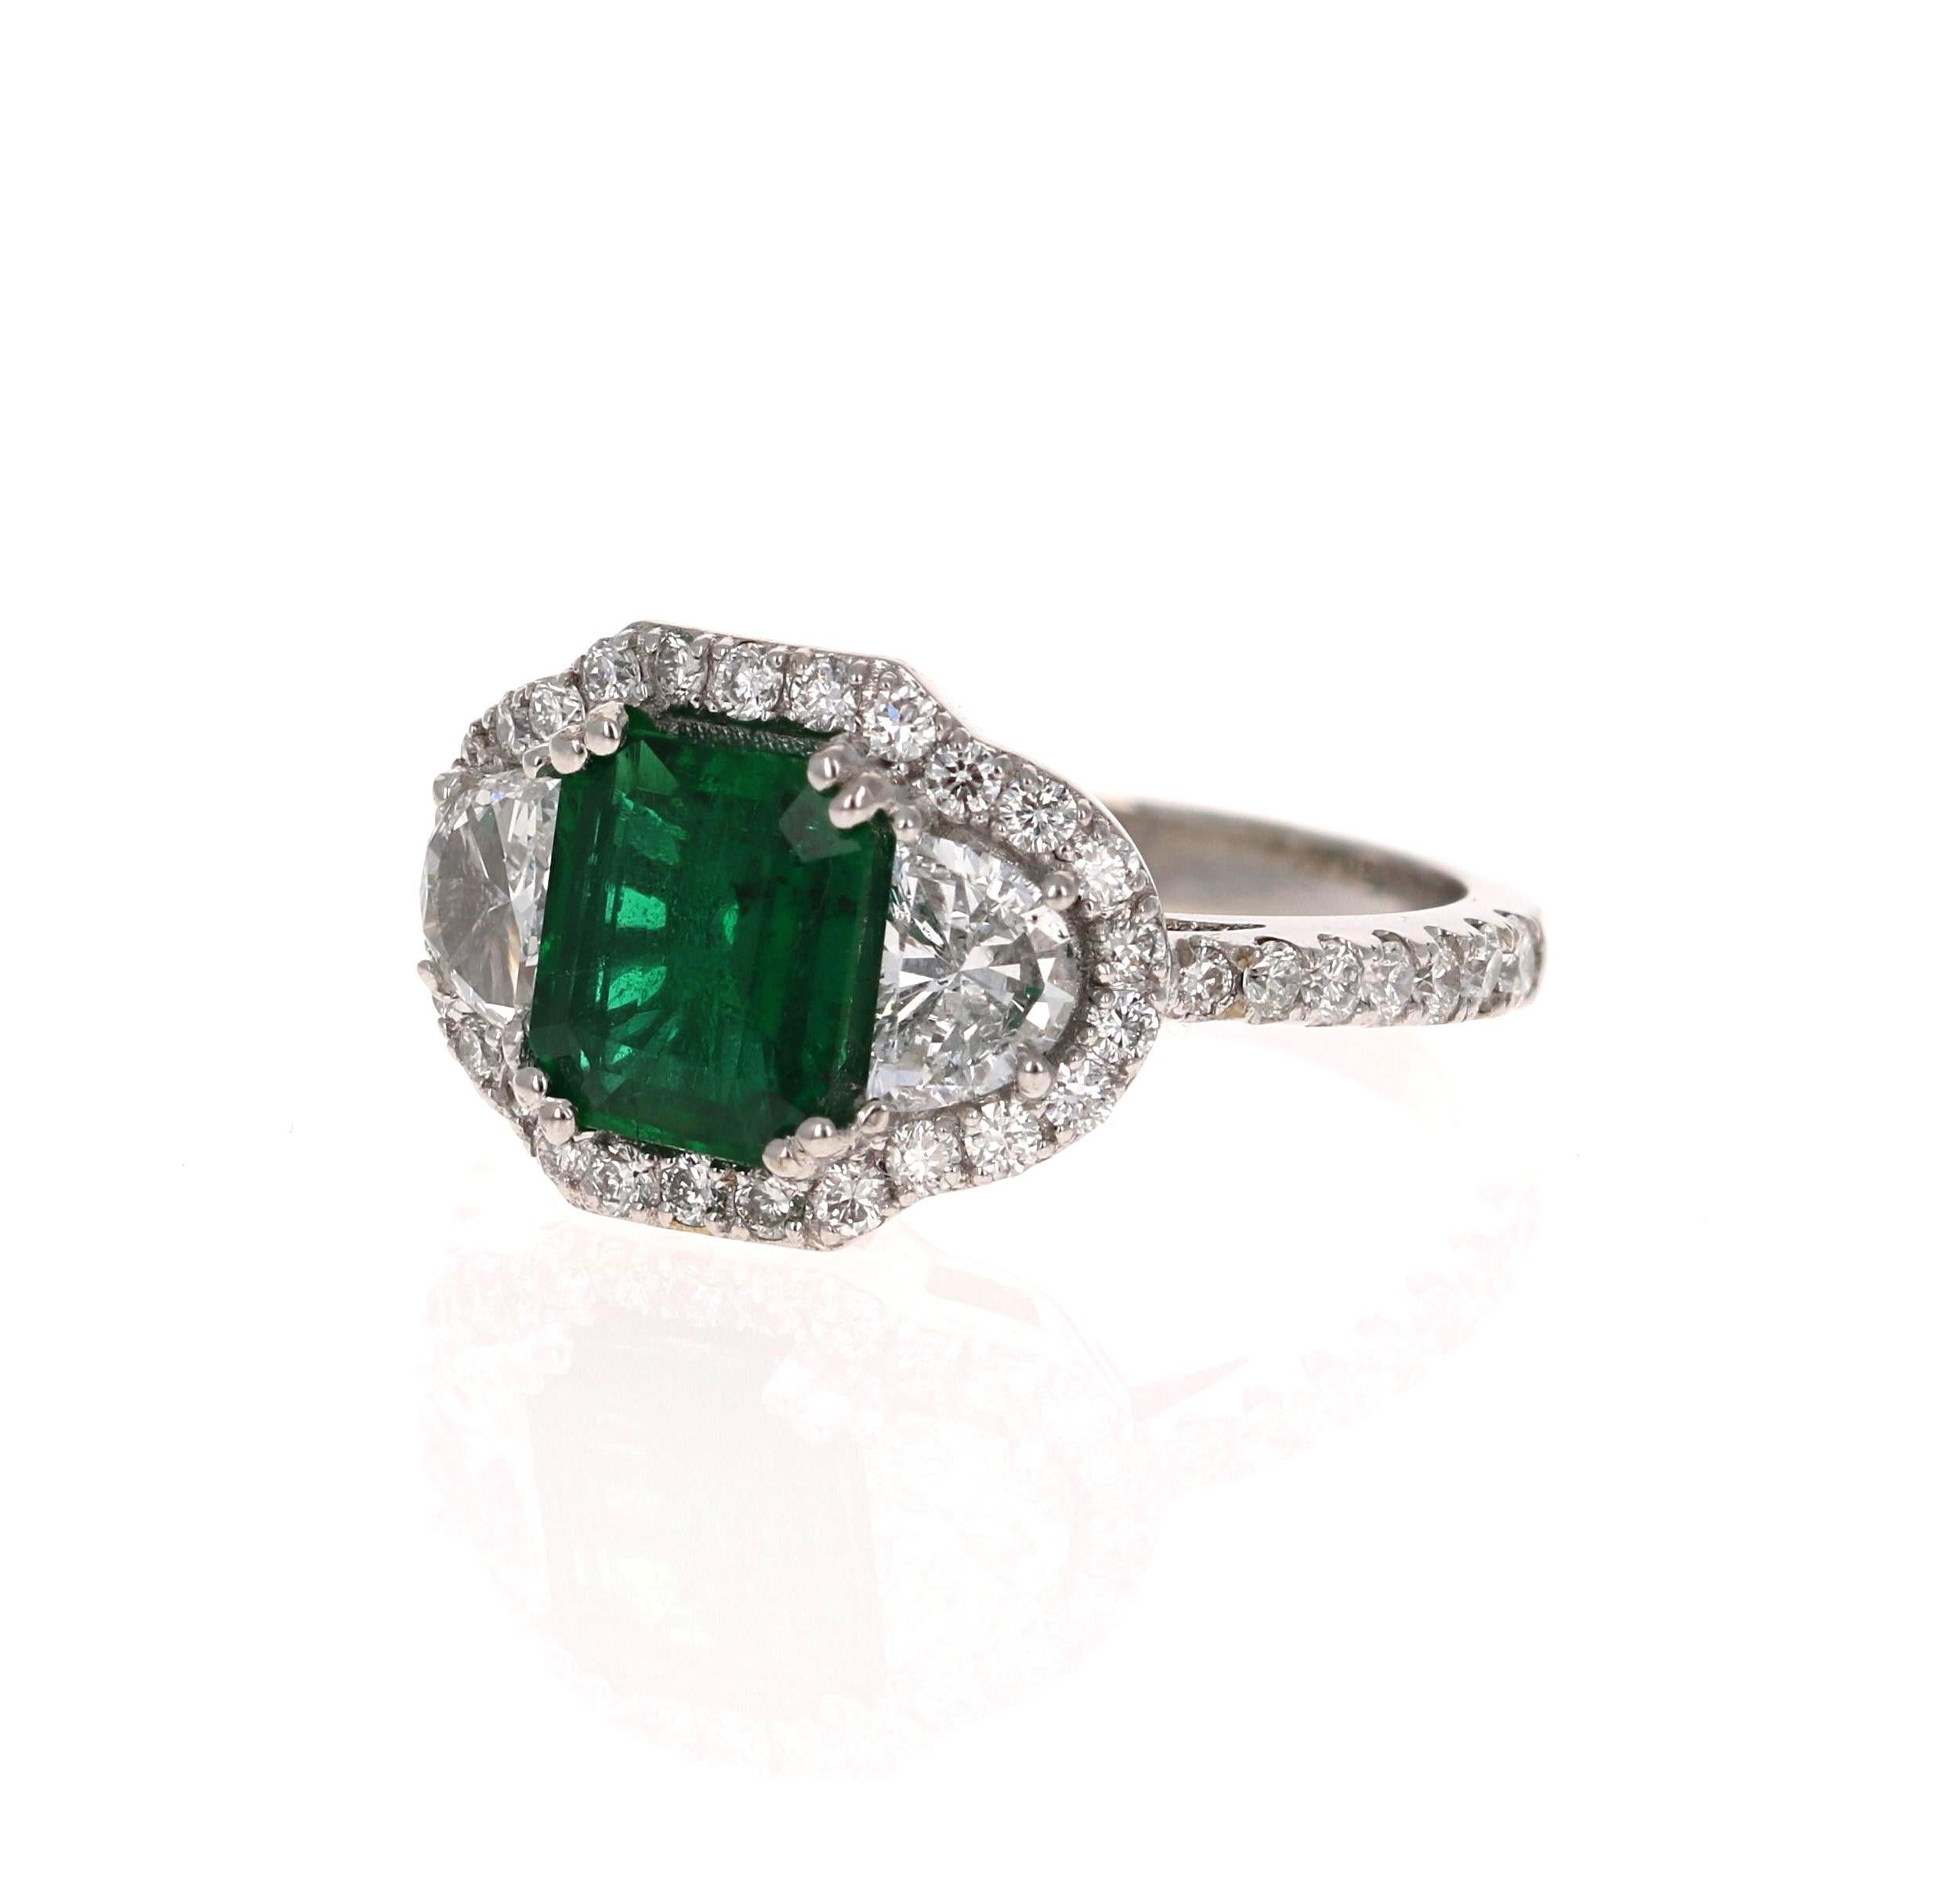 A beauty that is sure to be nothing less than a statement! 

This ring has a exquisite Emerald-Step Cut Green Emerald that weighs 1.25 Carats and has 2 Half Moon Cut Diamonds weighing 0.63 Carats. It is further embellished with 40 Round Cut Diamonds